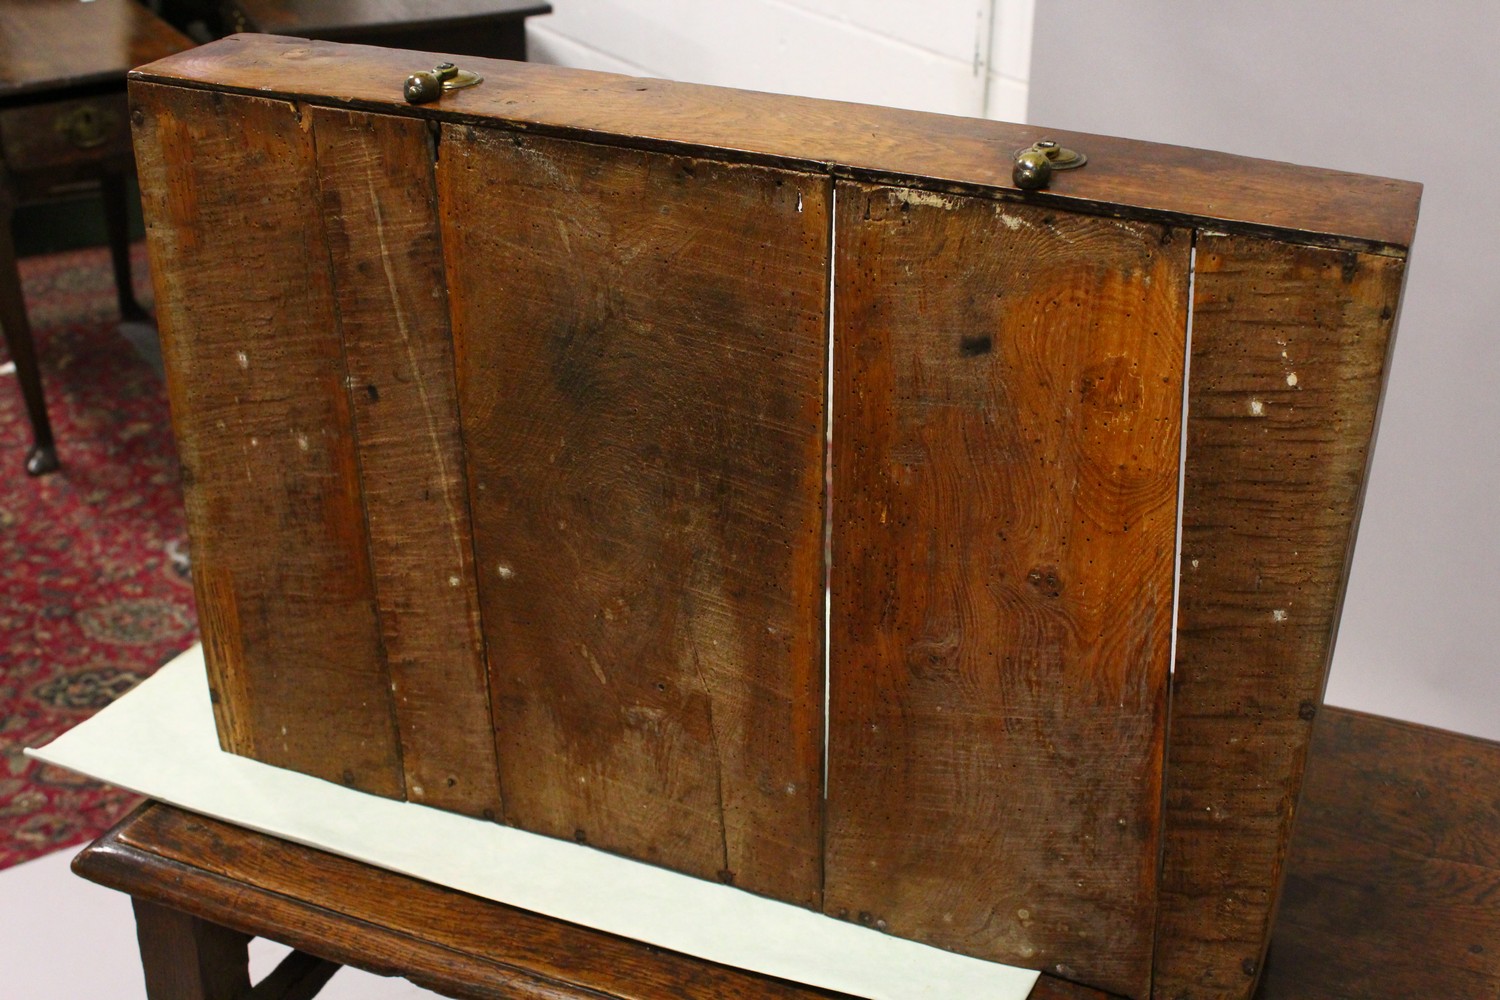 AN 18TH CENTURY OAK SIDE TABLE, with one long drawer, on turned legs united by an "X" shape - Image 8 of 14